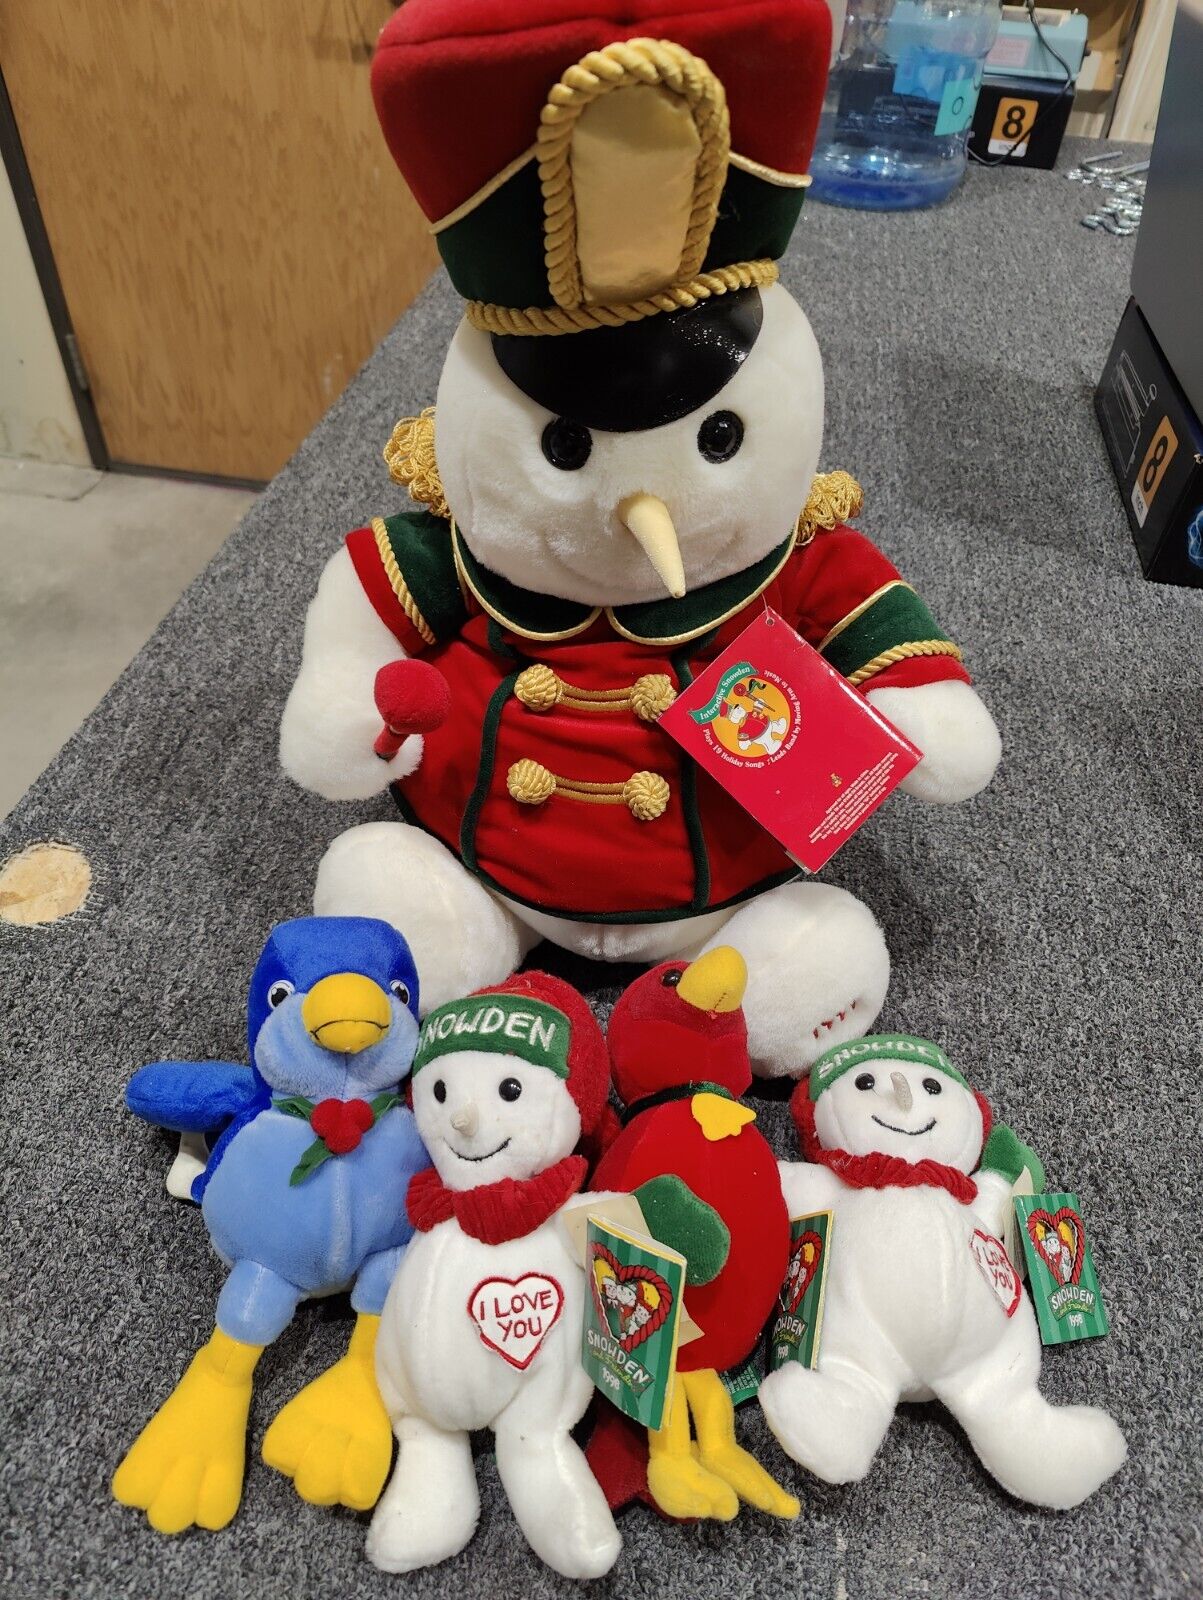 Vintage Snowden Plush Snowman Musical Marching Band Christmas 1999 Lot 